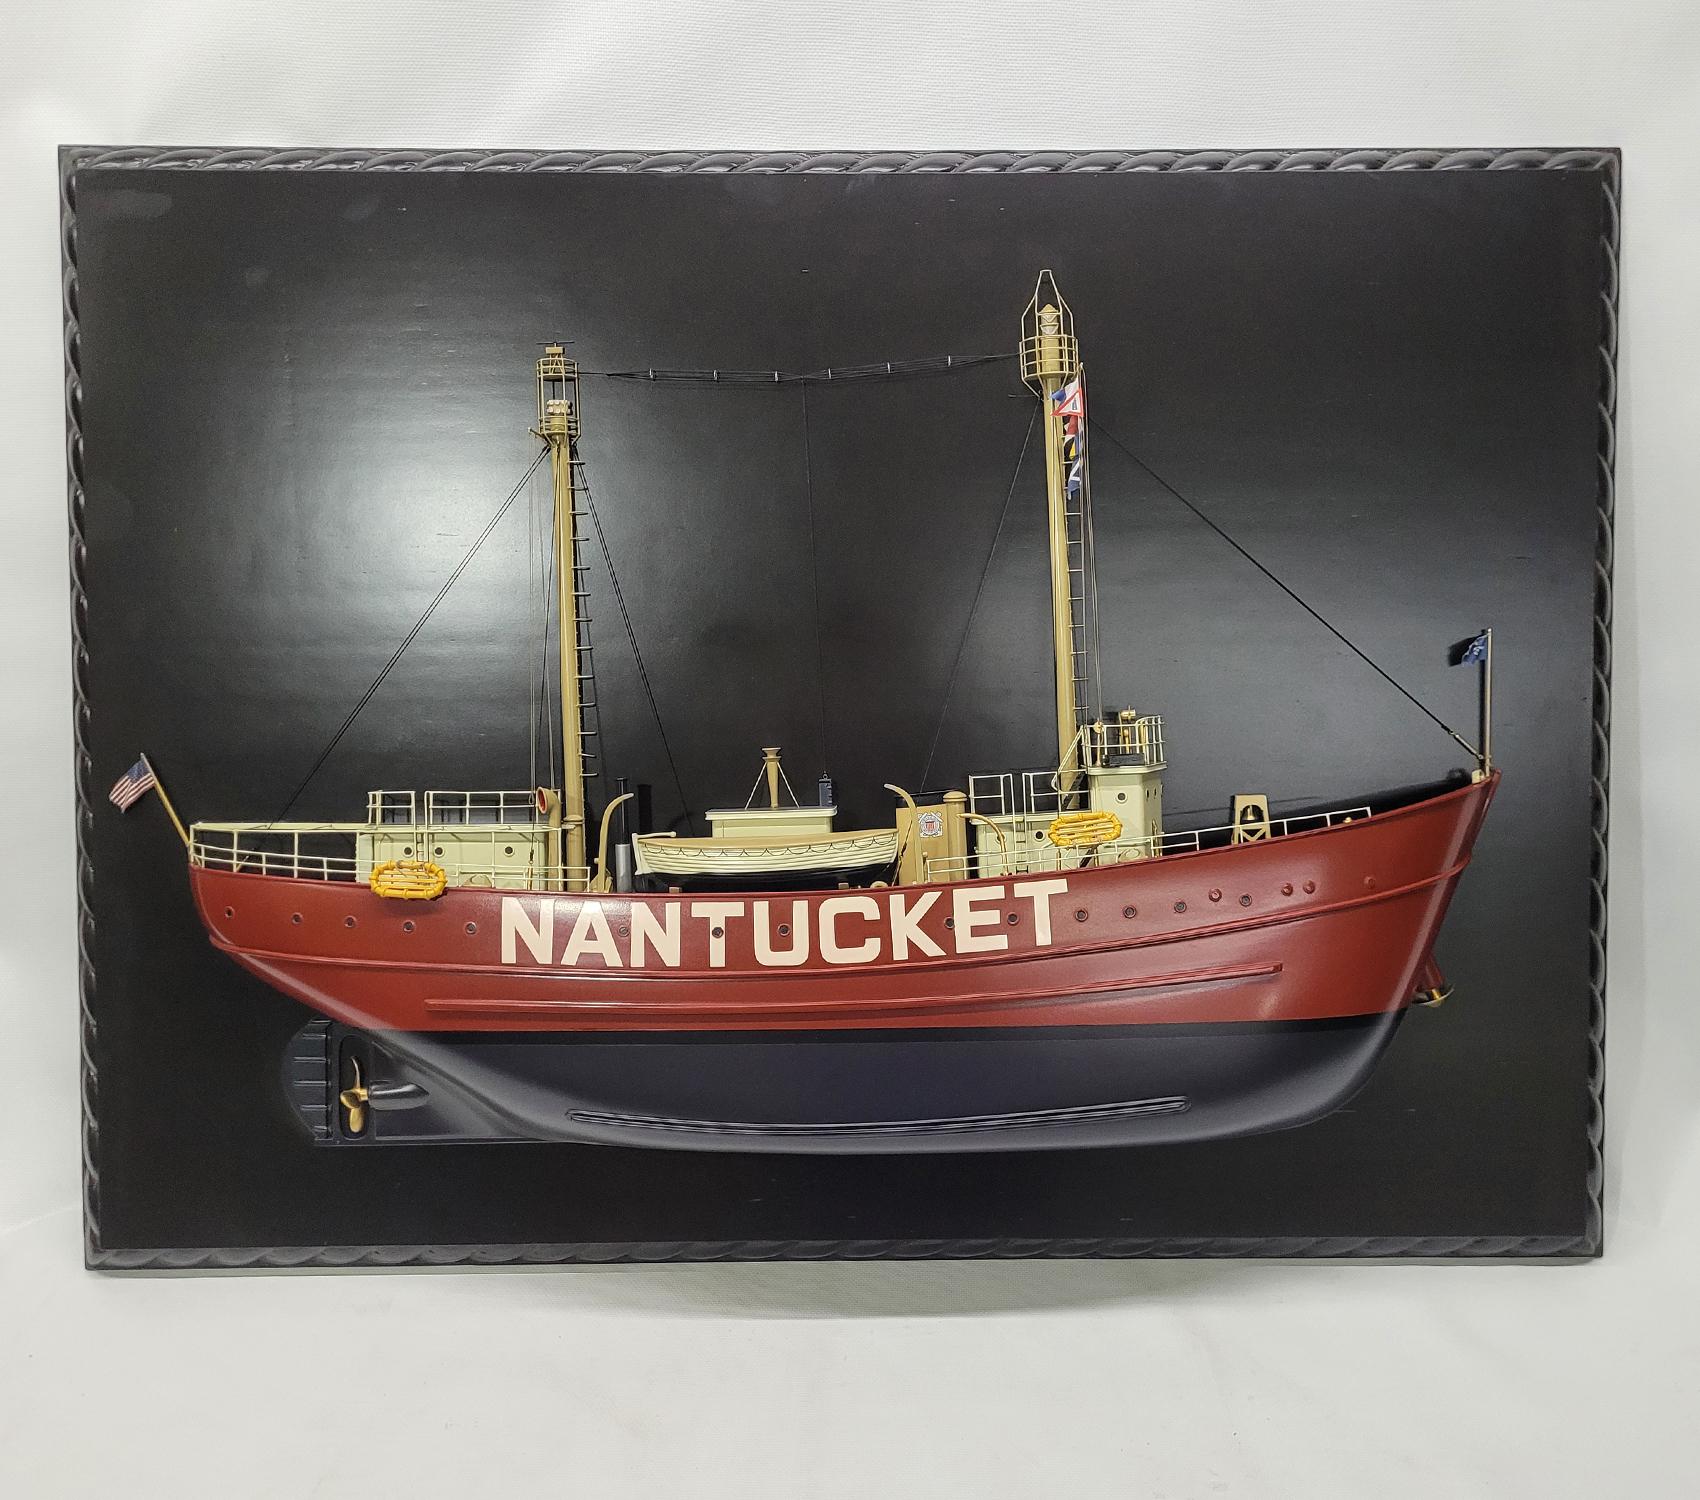 Museum quality half model of the Lightship Nantucket. This fine model has a carved hull, countless milled brass fittings, built up cabins, etc. Details include masts with signal flags, railings, lifeboat, stove pipe, bell, winch, funnel, etc.